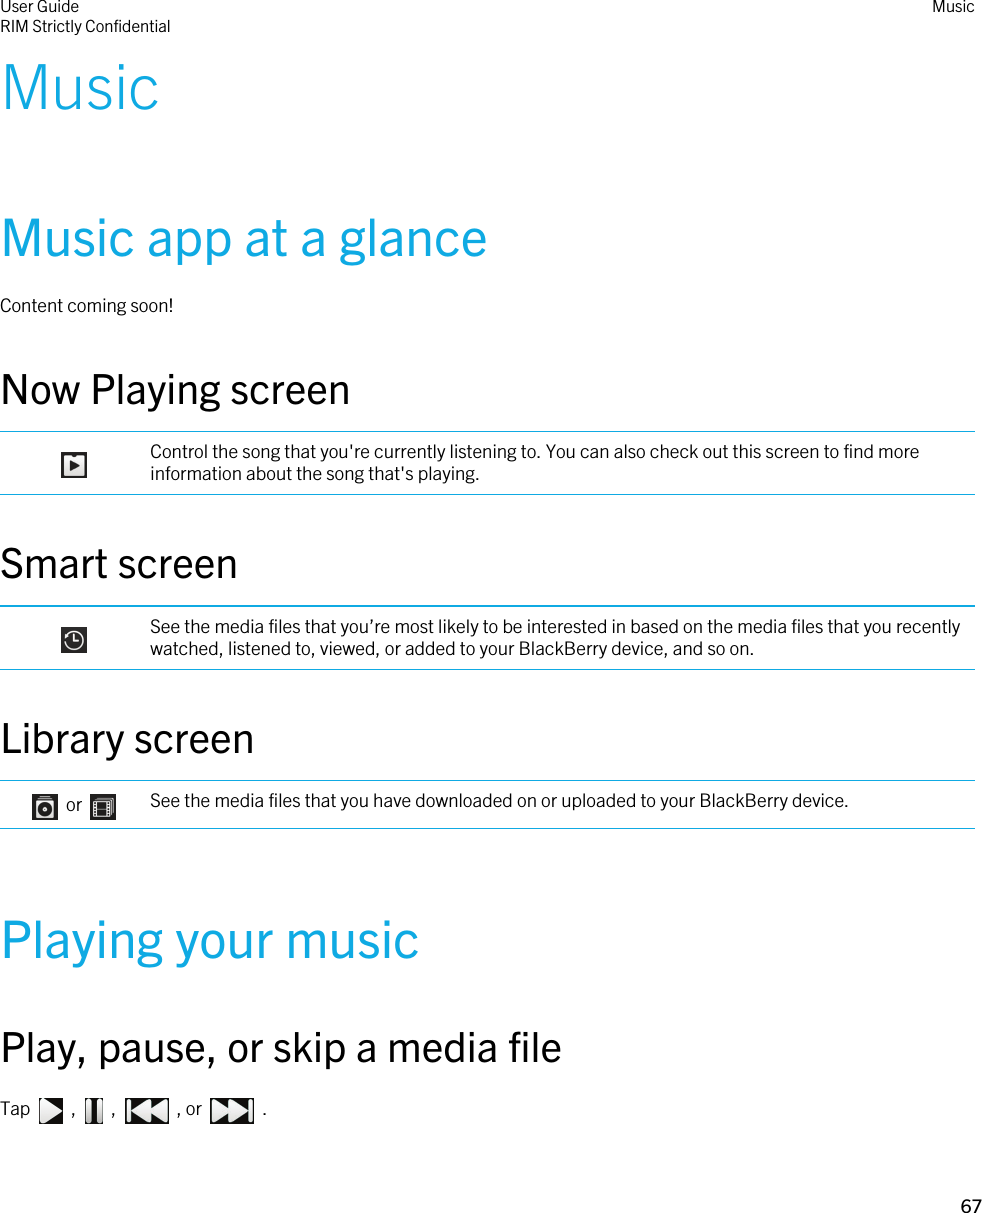 MusicMusic app at a glanceContent coming soon!Now Playing screen Control the song that you&apos;re currently listening to. You can also check out this screen to find more information about the song that&apos;s playing.Smart screen See the media files that you’re most likely to be interested in based on the media files that you recently watched, listened to, viewed, or added to your BlackBerry device, and so on.Library screen    or  See the media files that you have downloaded on or uploaded to your BlackBerry device.Playing your musicPlay, pause, or skip a media fileTap    ,    ,    , or    . User GuideRIM Strictly Confidential Music67 